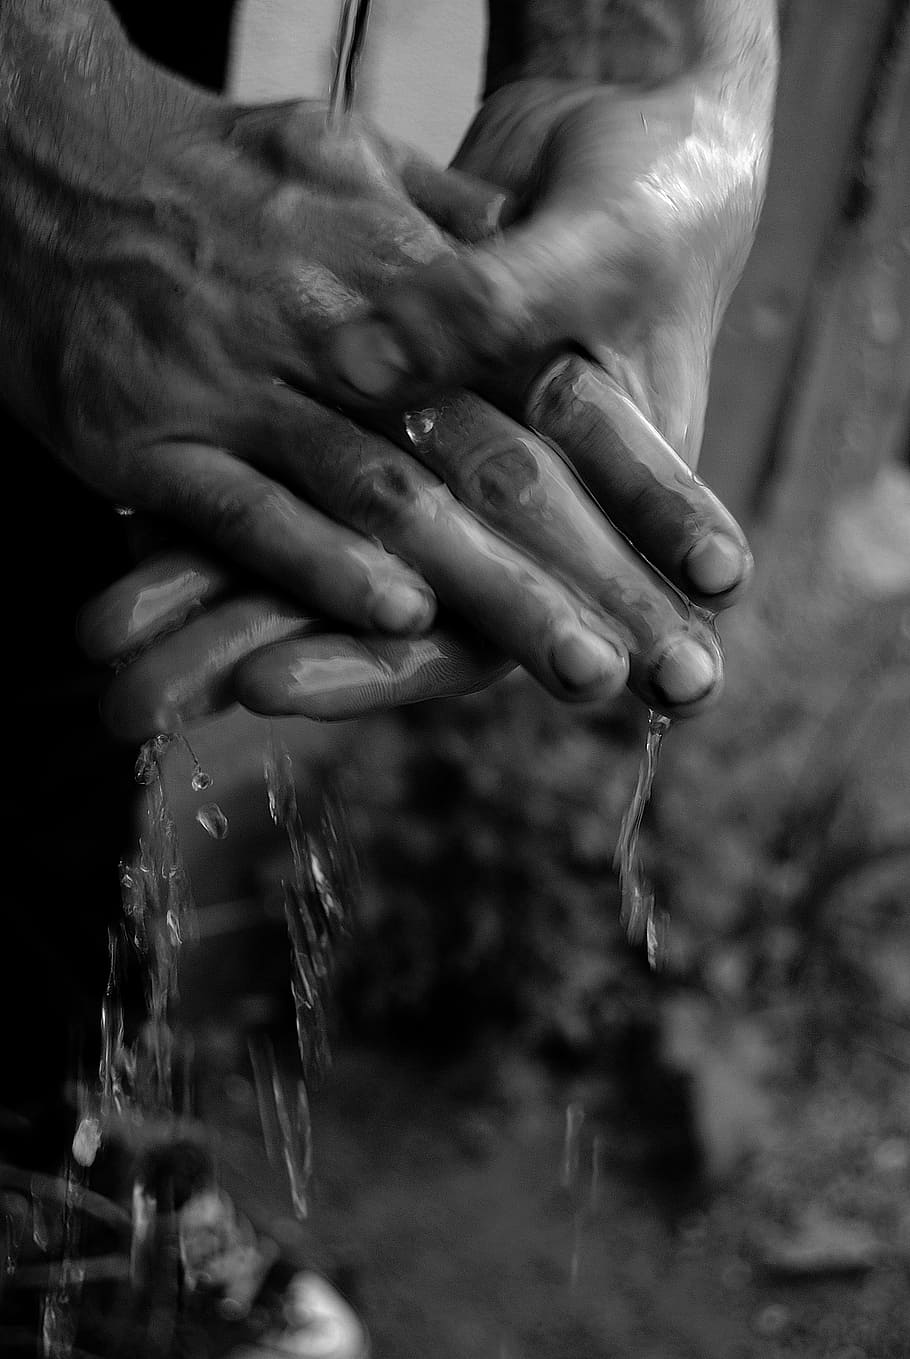 Hands, Poor, Black And White, Homeless, poverty, human hand